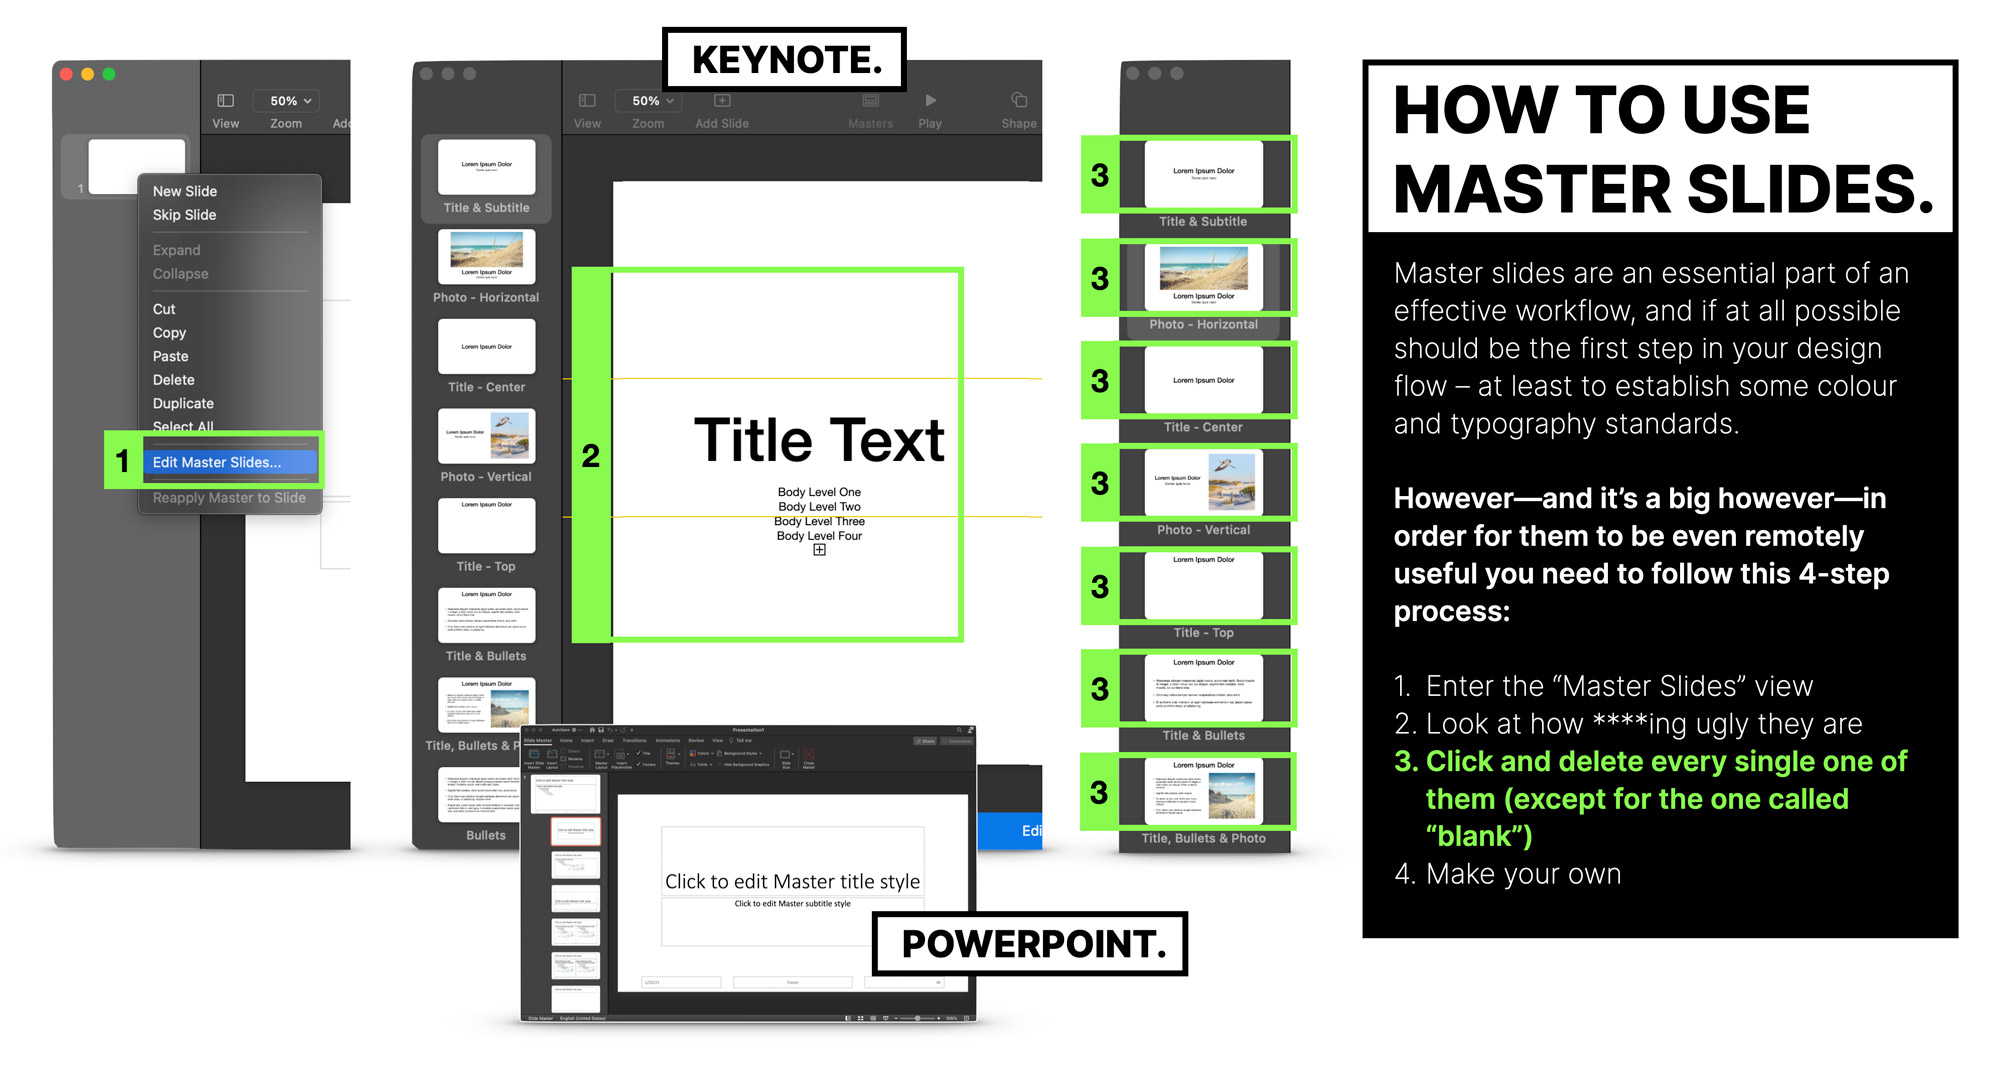 How to use master slides in Keynote